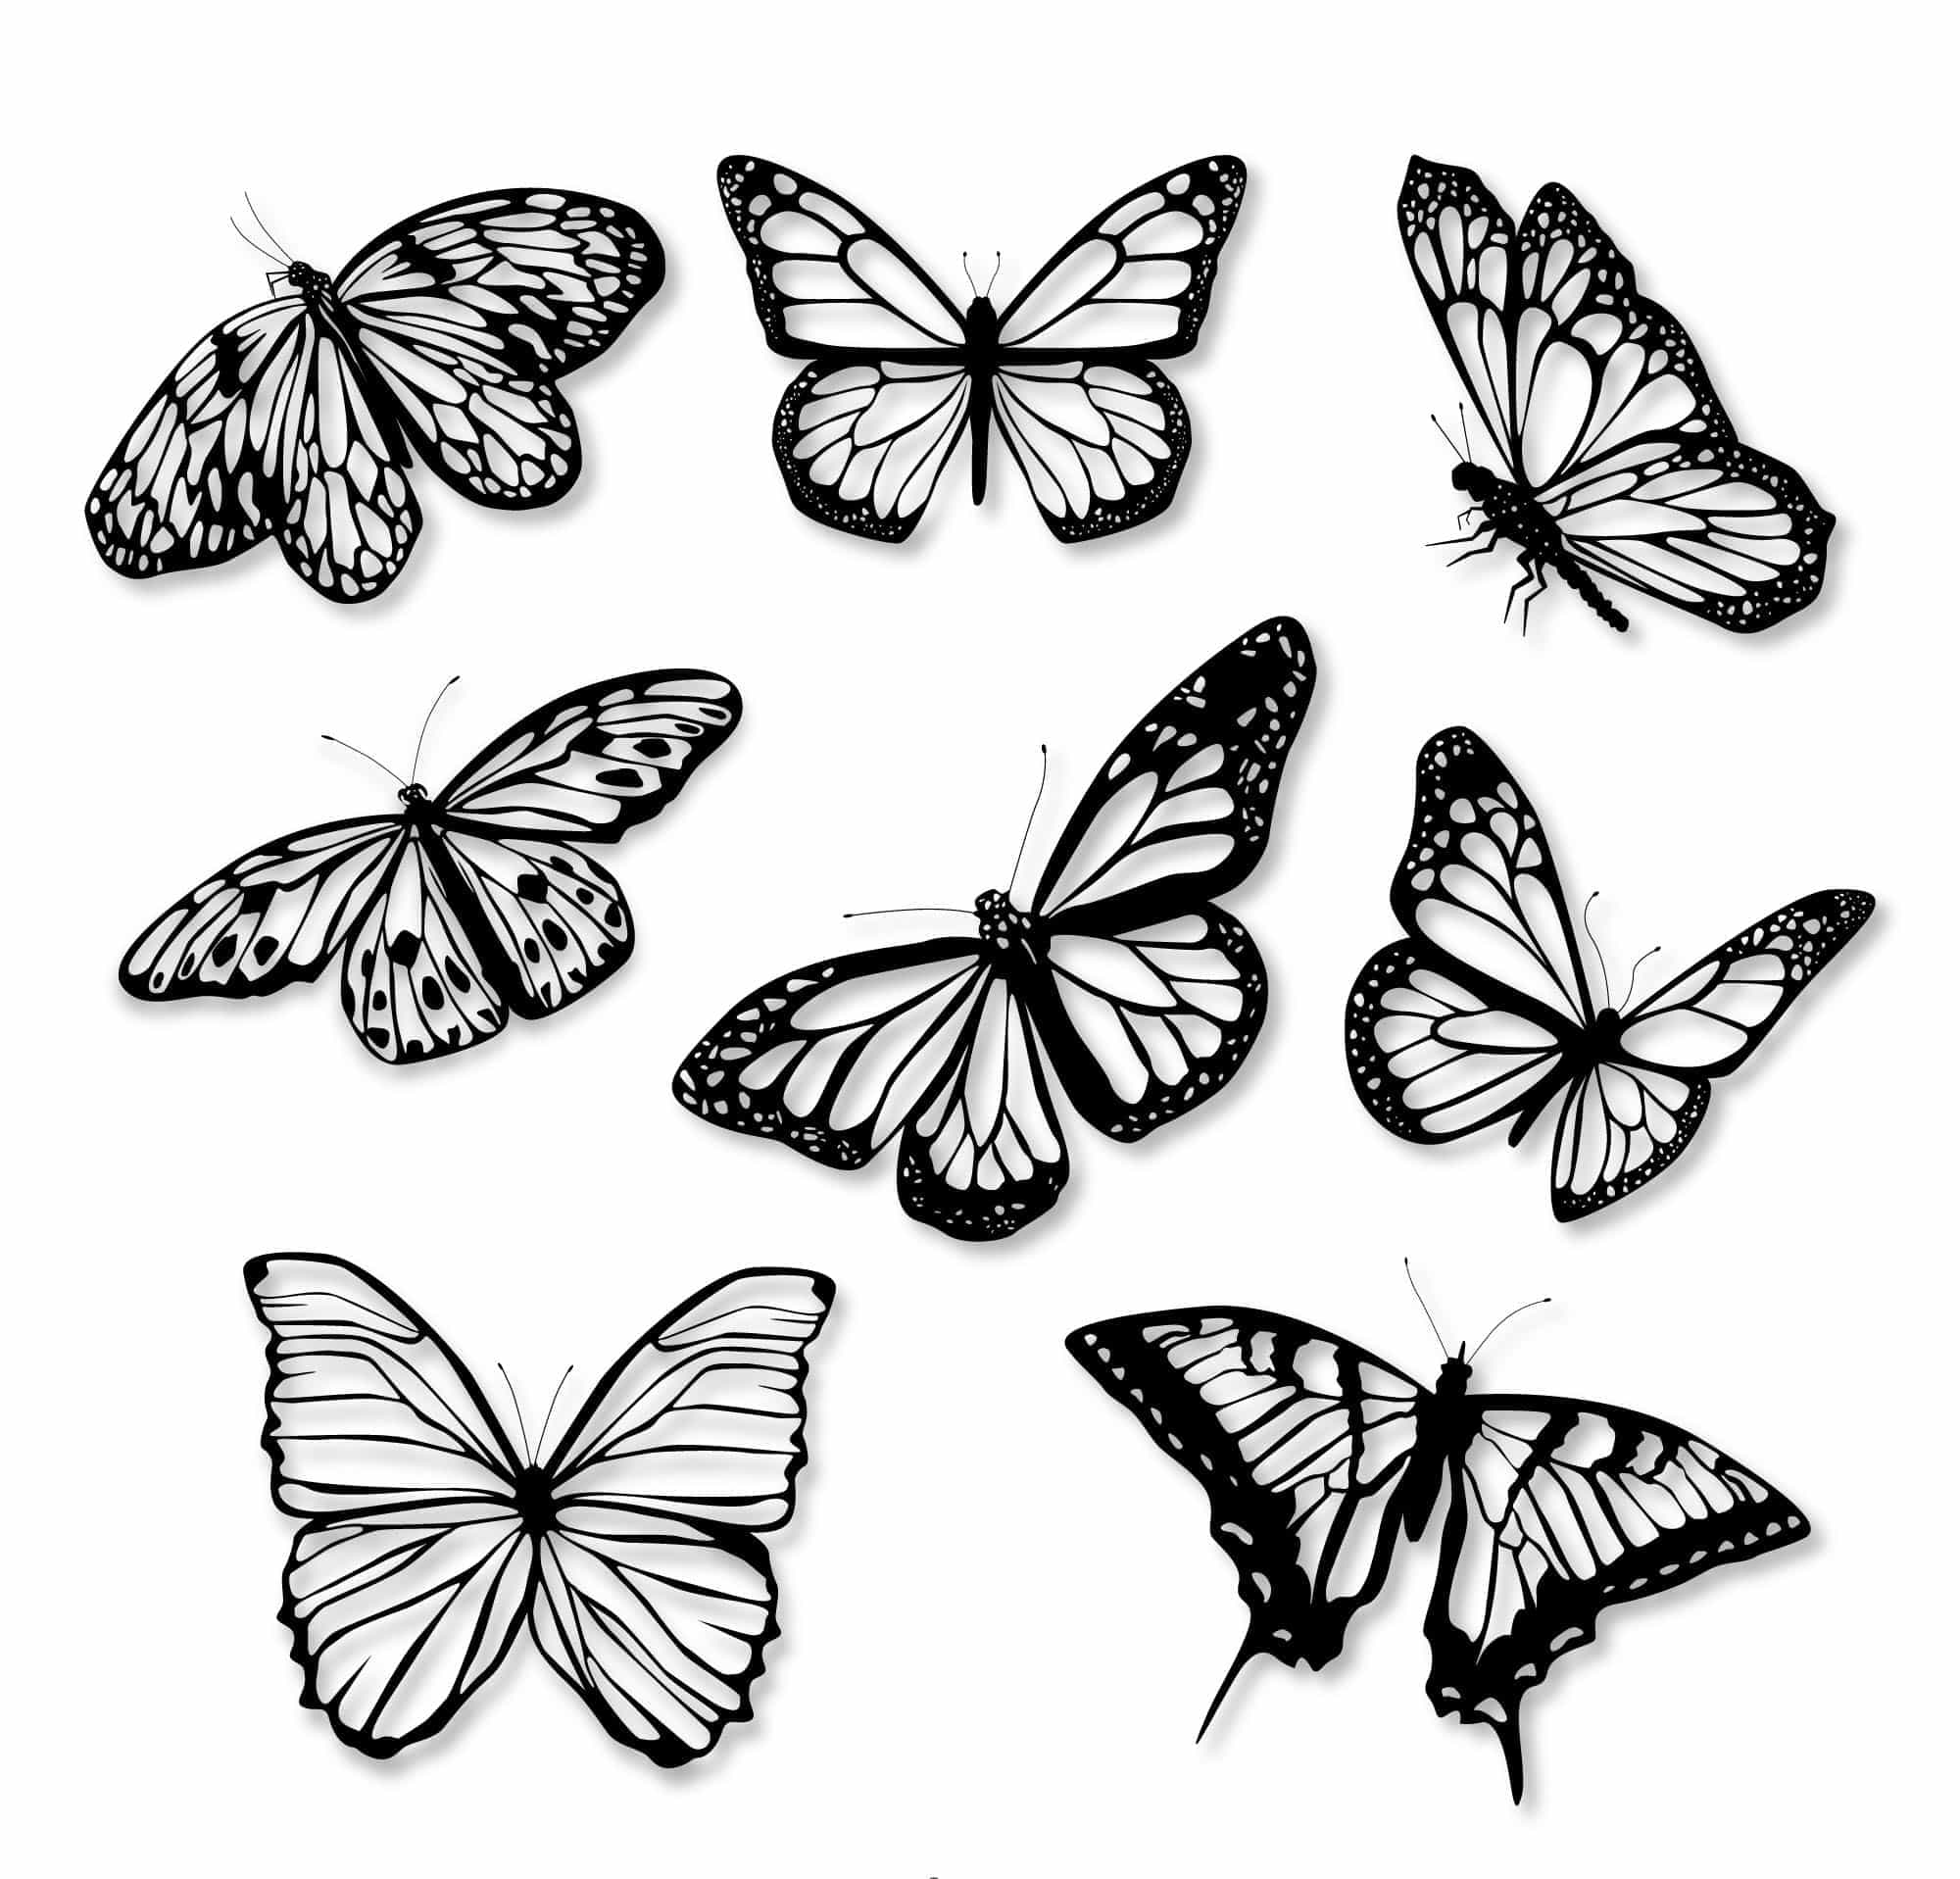 Realistic Butterfly Illustration Set Free Vector